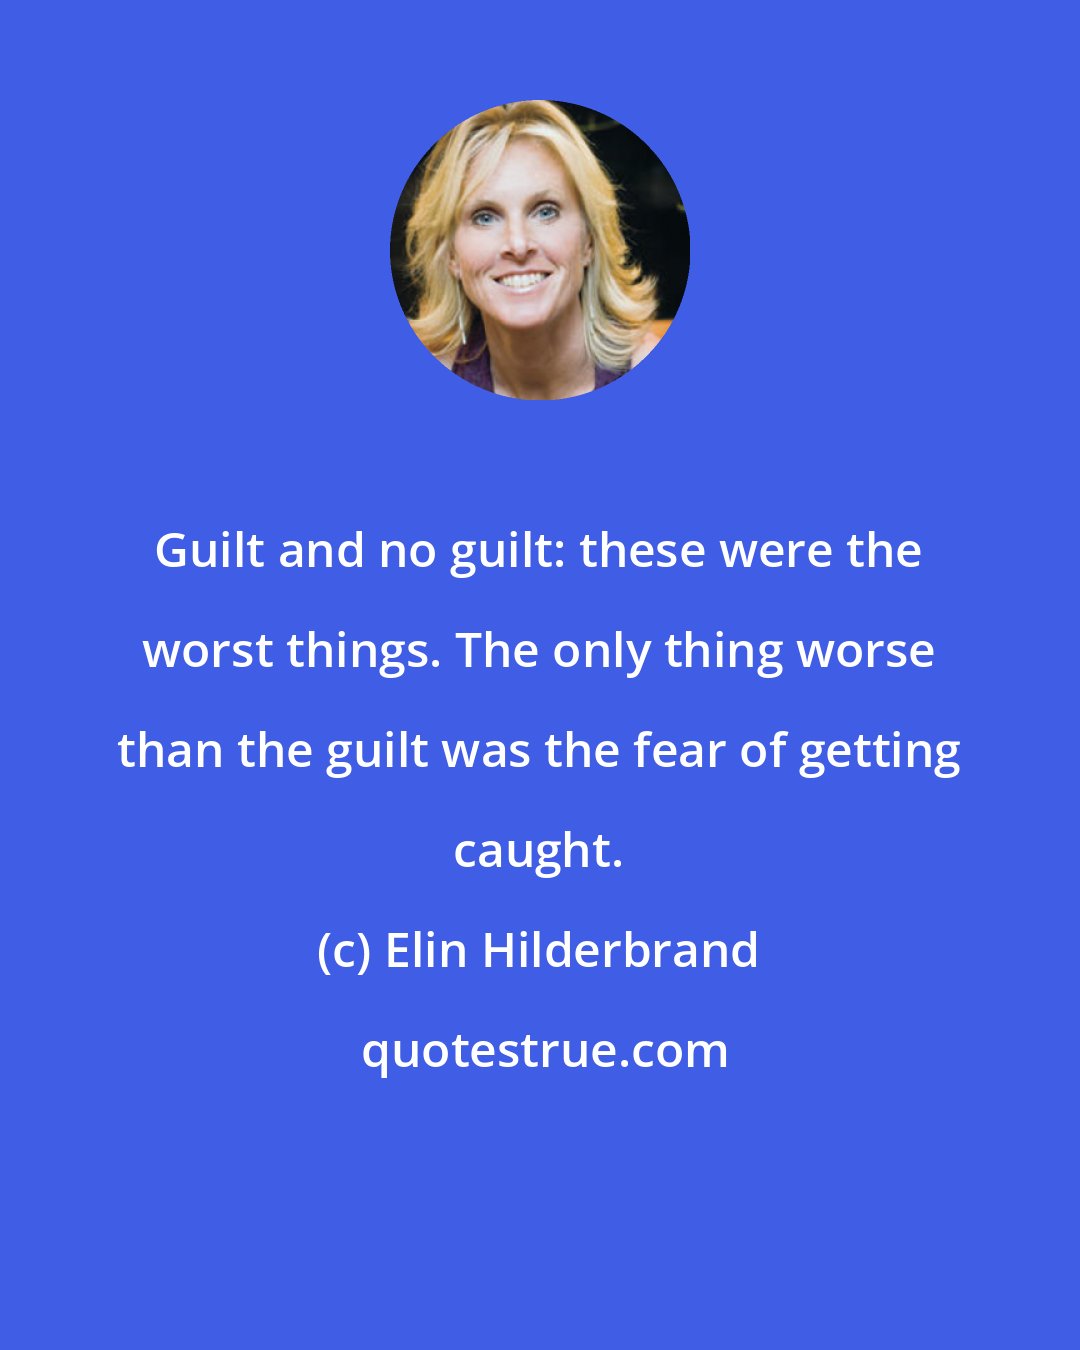 Elin Hilderbrand: Guilt and no guilt: these were the worst things. The only thing worse than the guilt was the fear of getting caught.